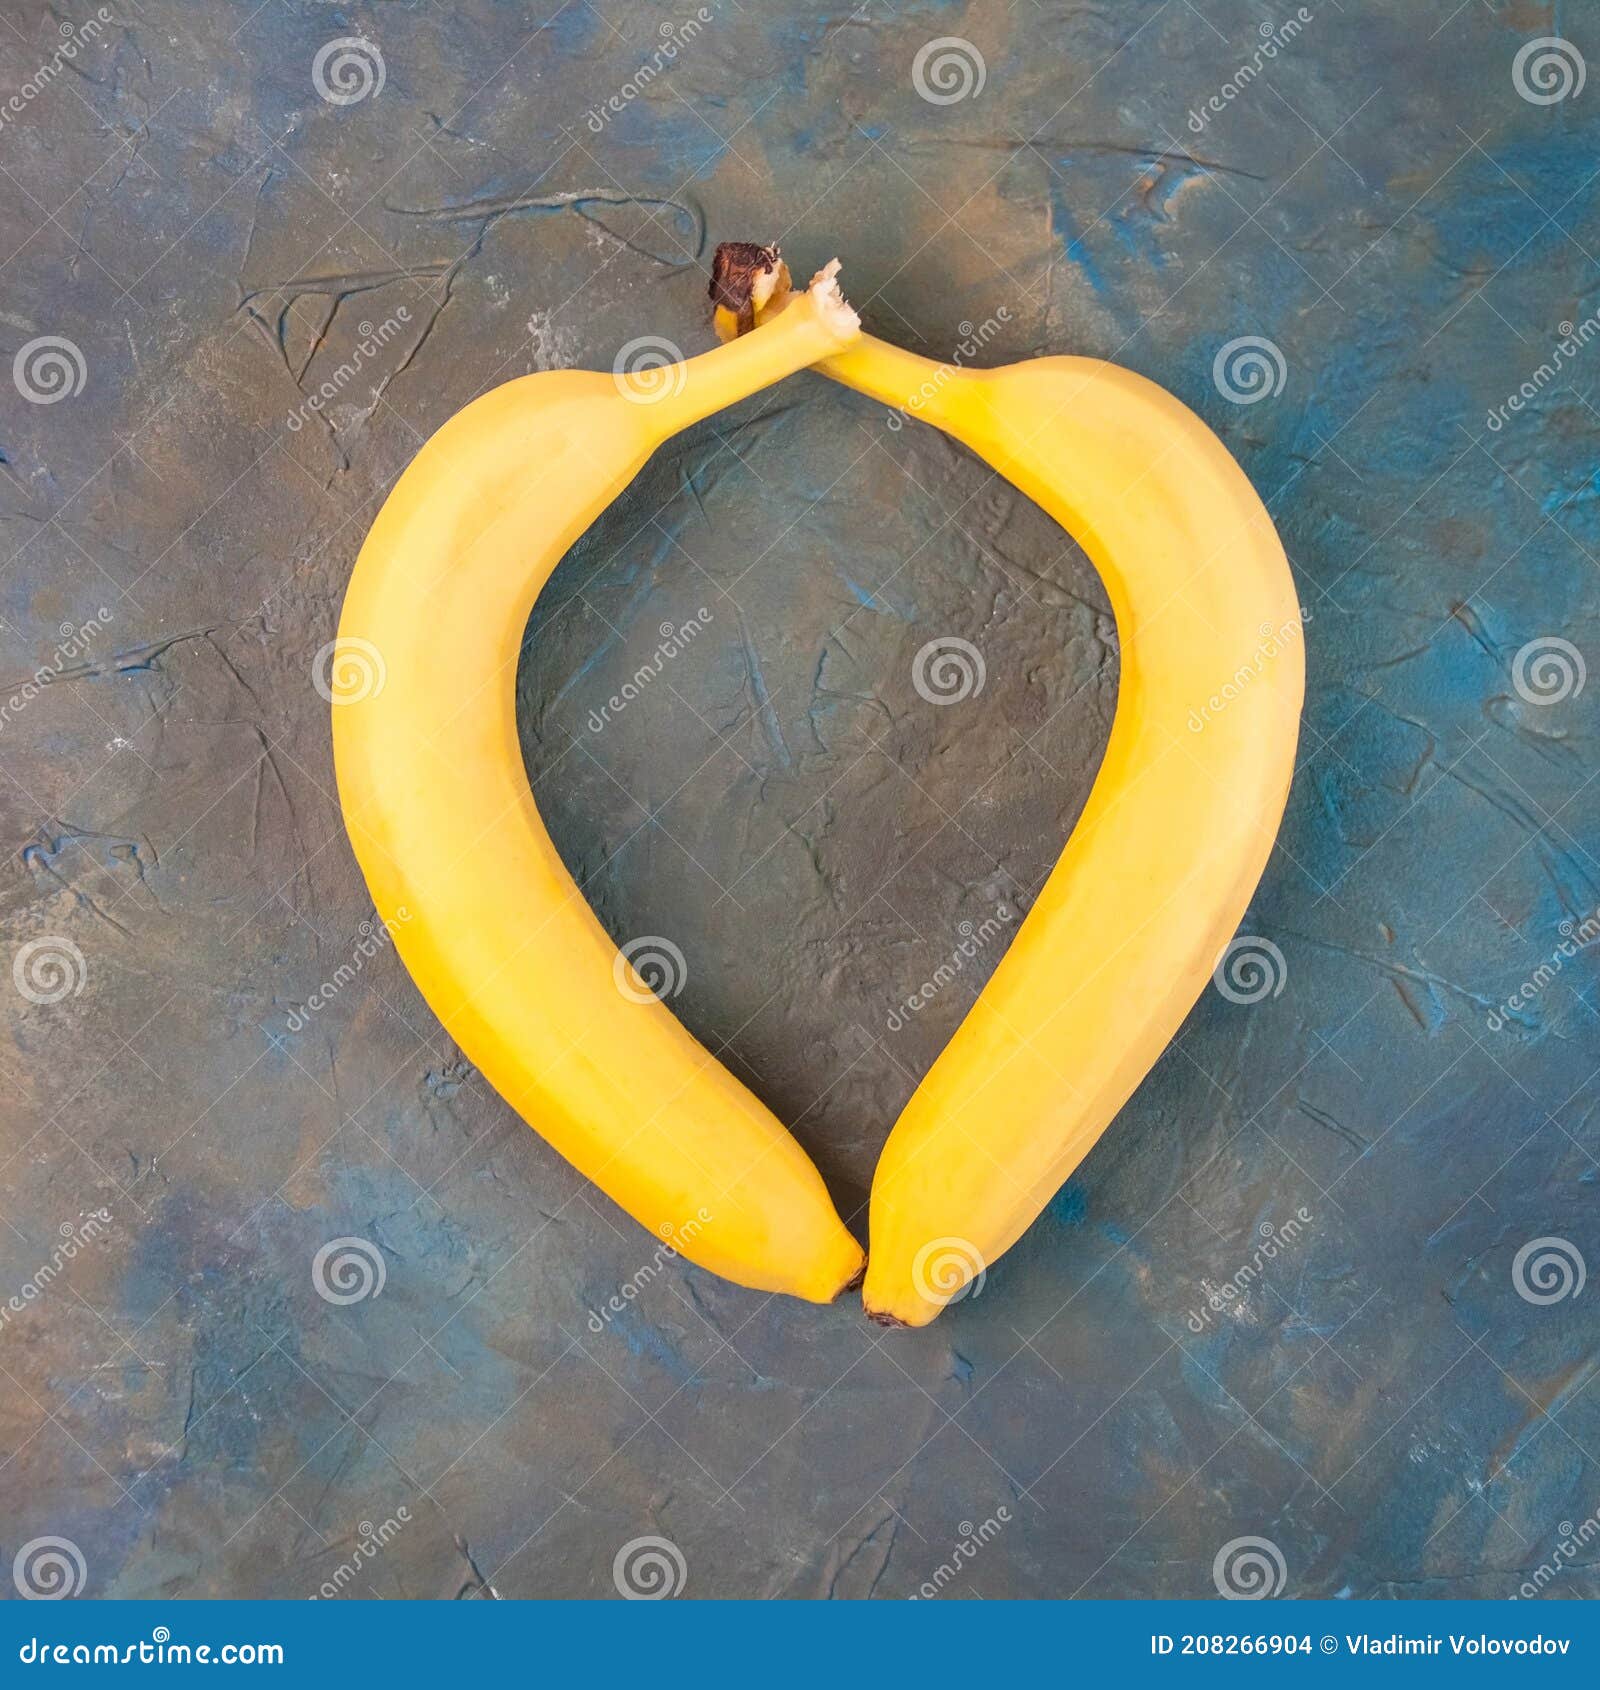 Two Yellow Bananas Are Laid Out In The Shape Of A Heart The Concept Of Valentine S Day Stock